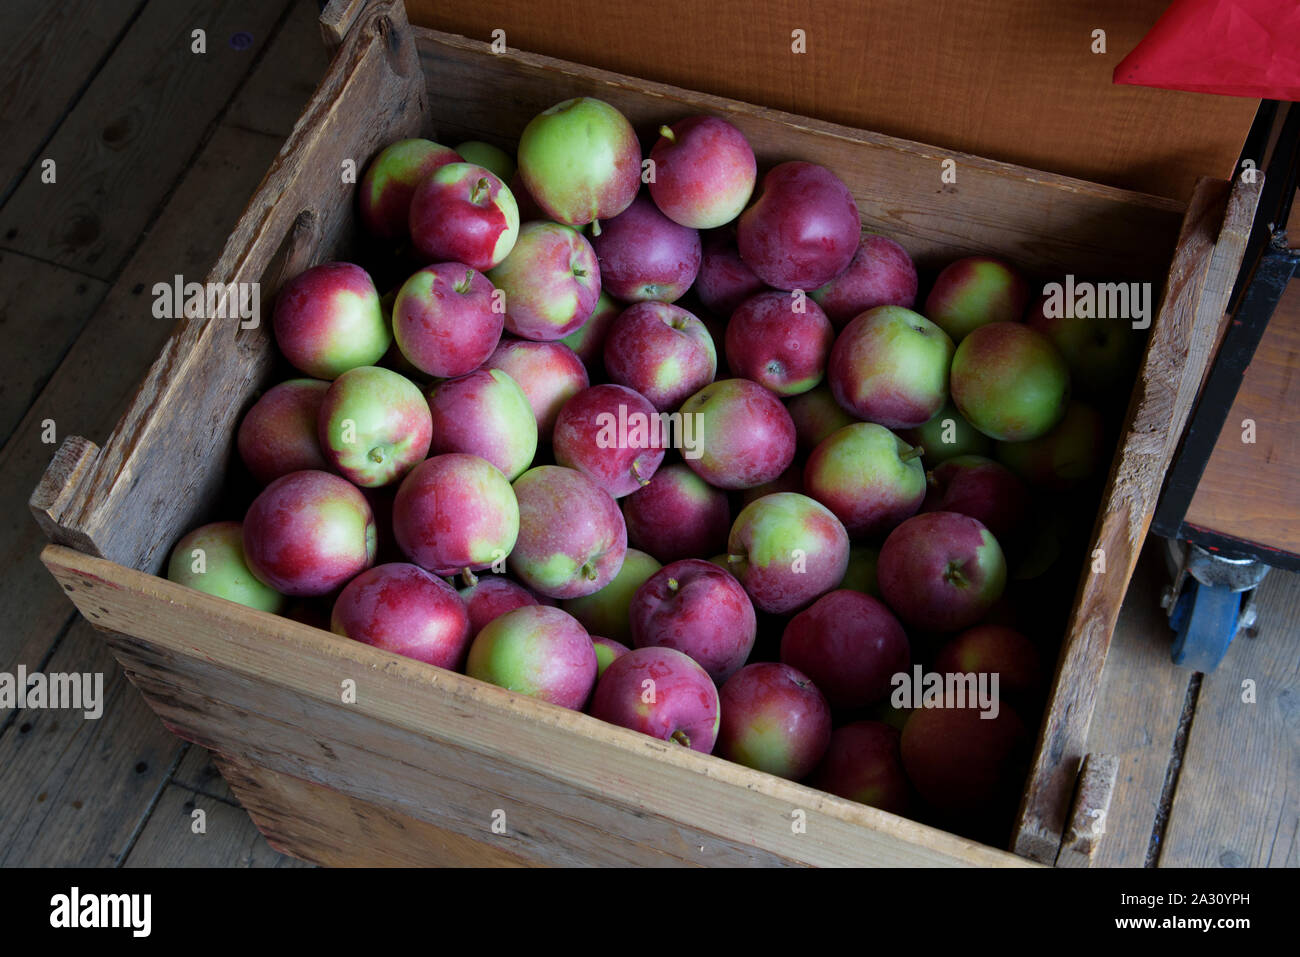 Freshly picked apples in a wooden crate. Stock Photo